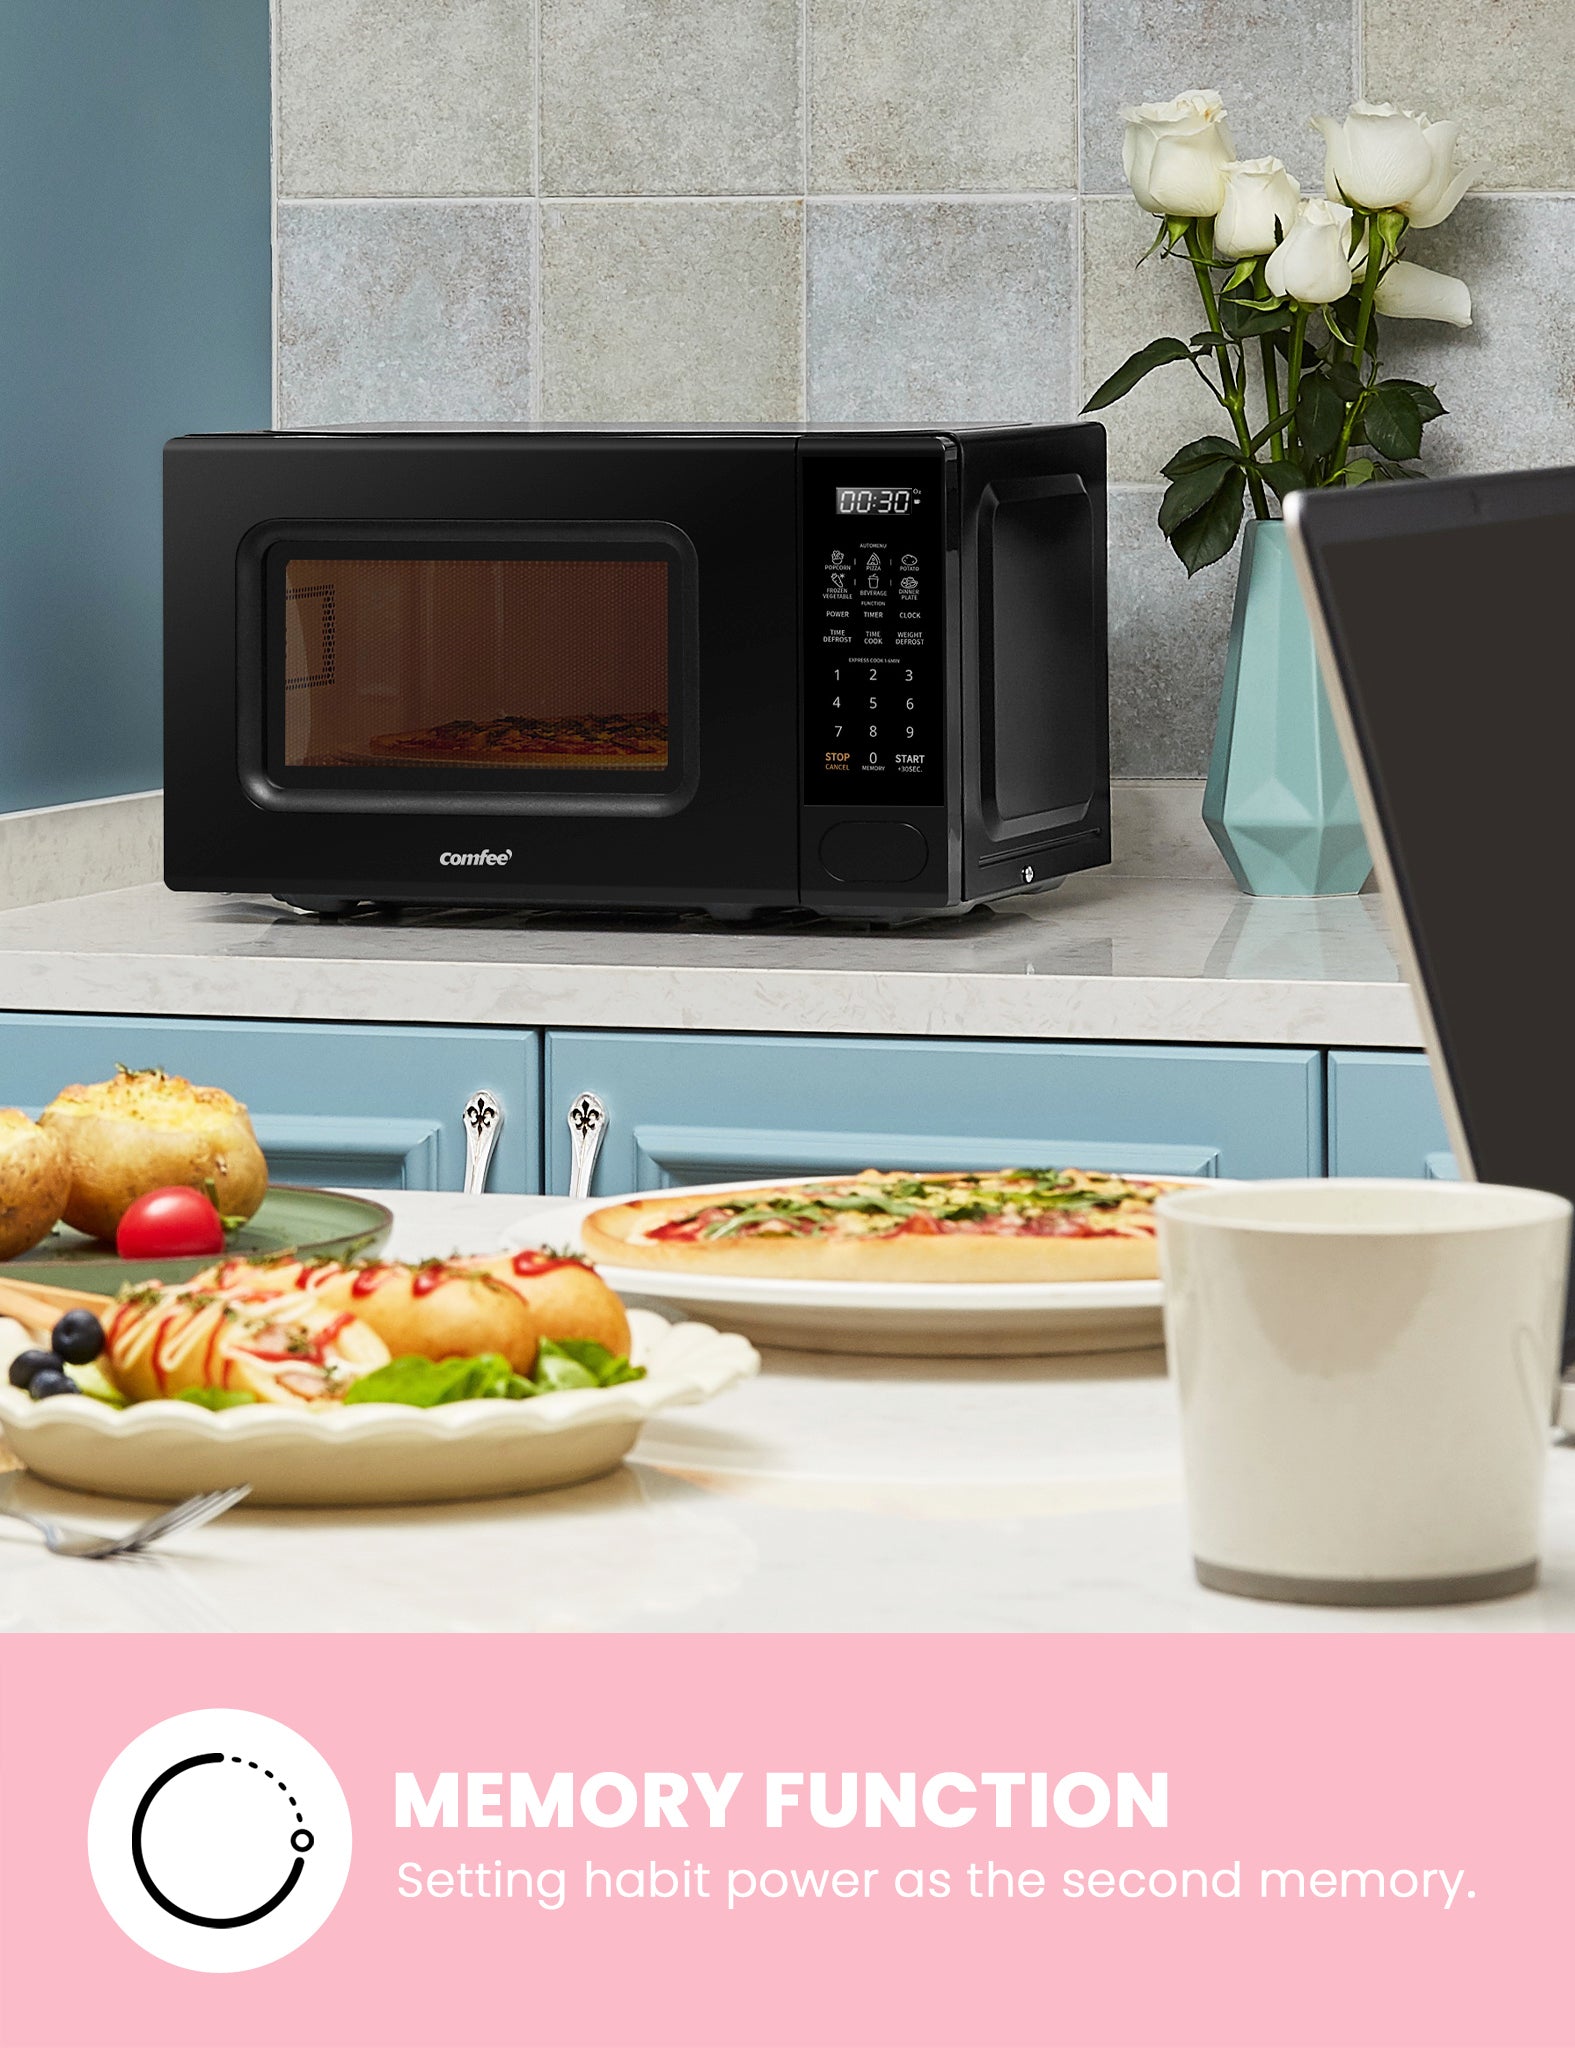 Pizza was baking in a comfee retro microwave on the table, and some baked goods were placed on a table not far away